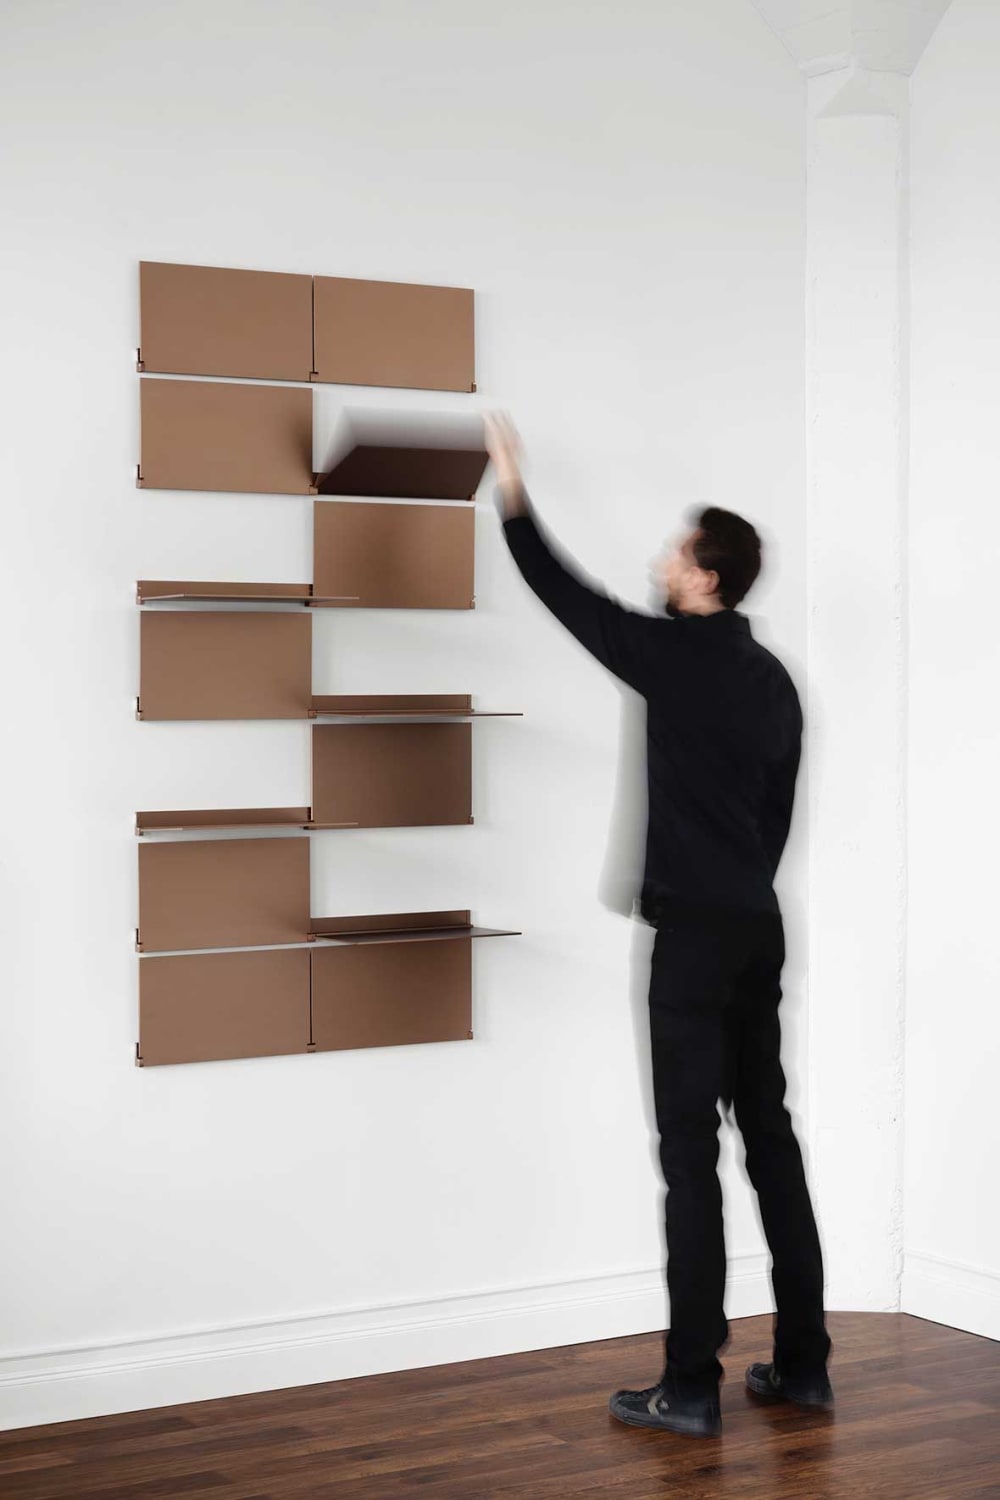 A Modular Shelving System Doubles As Wall Art and Mirrors